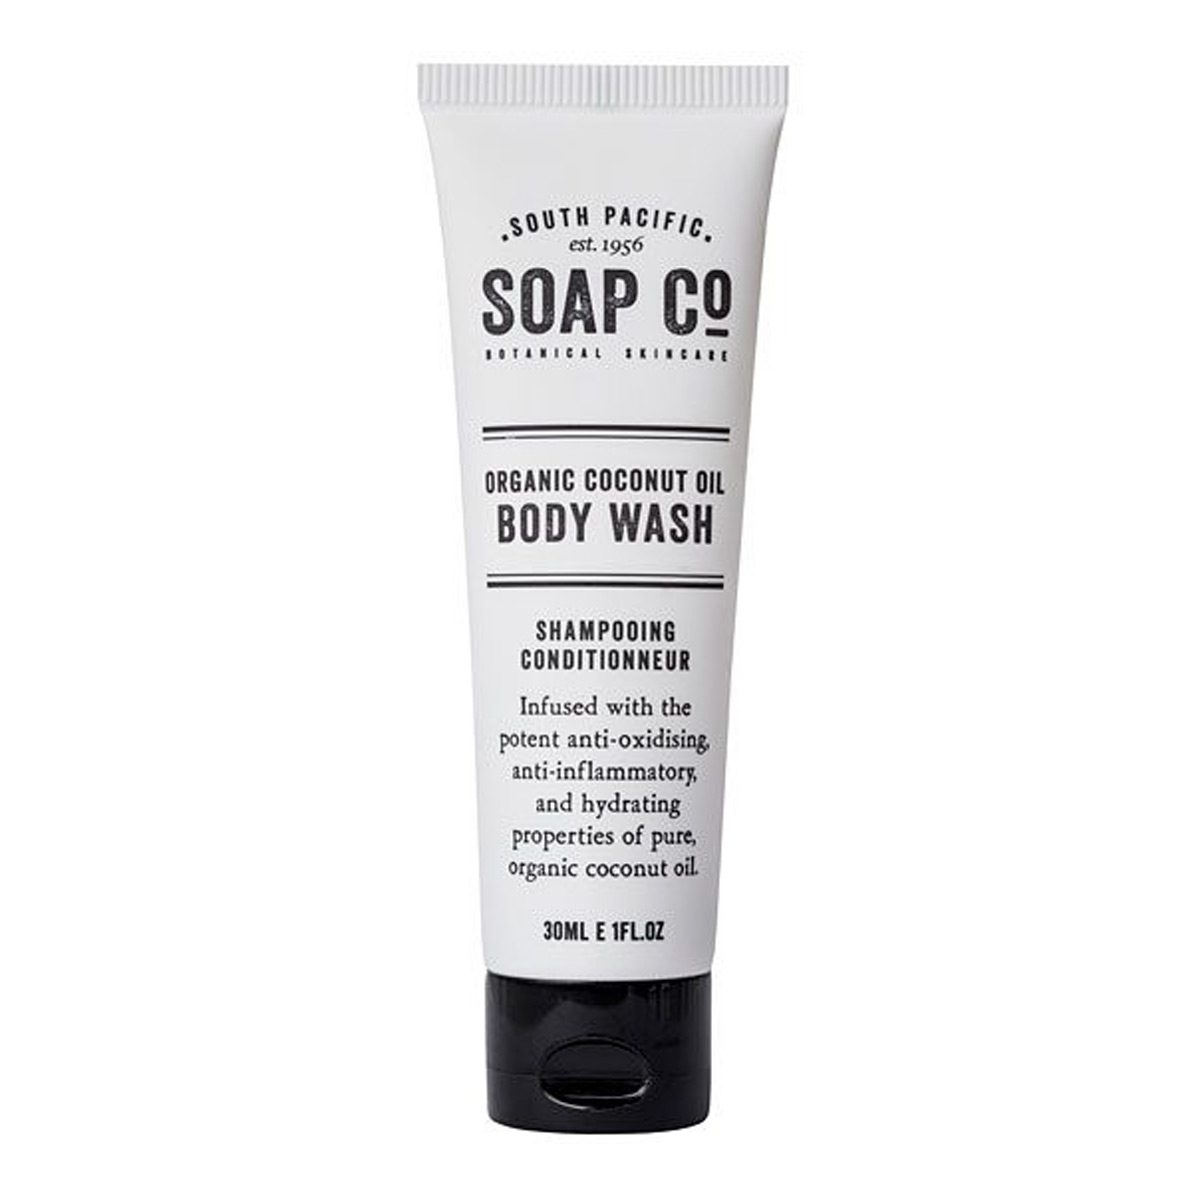 consumables-hospitality-guest-amenities-soap-co-body-rebalancing-wash-tube-30ml-x100-paraben-free-vjs-organic-coconut-oil-replacing-lost-nutrients-vjs-distributors-SOAPCOBT